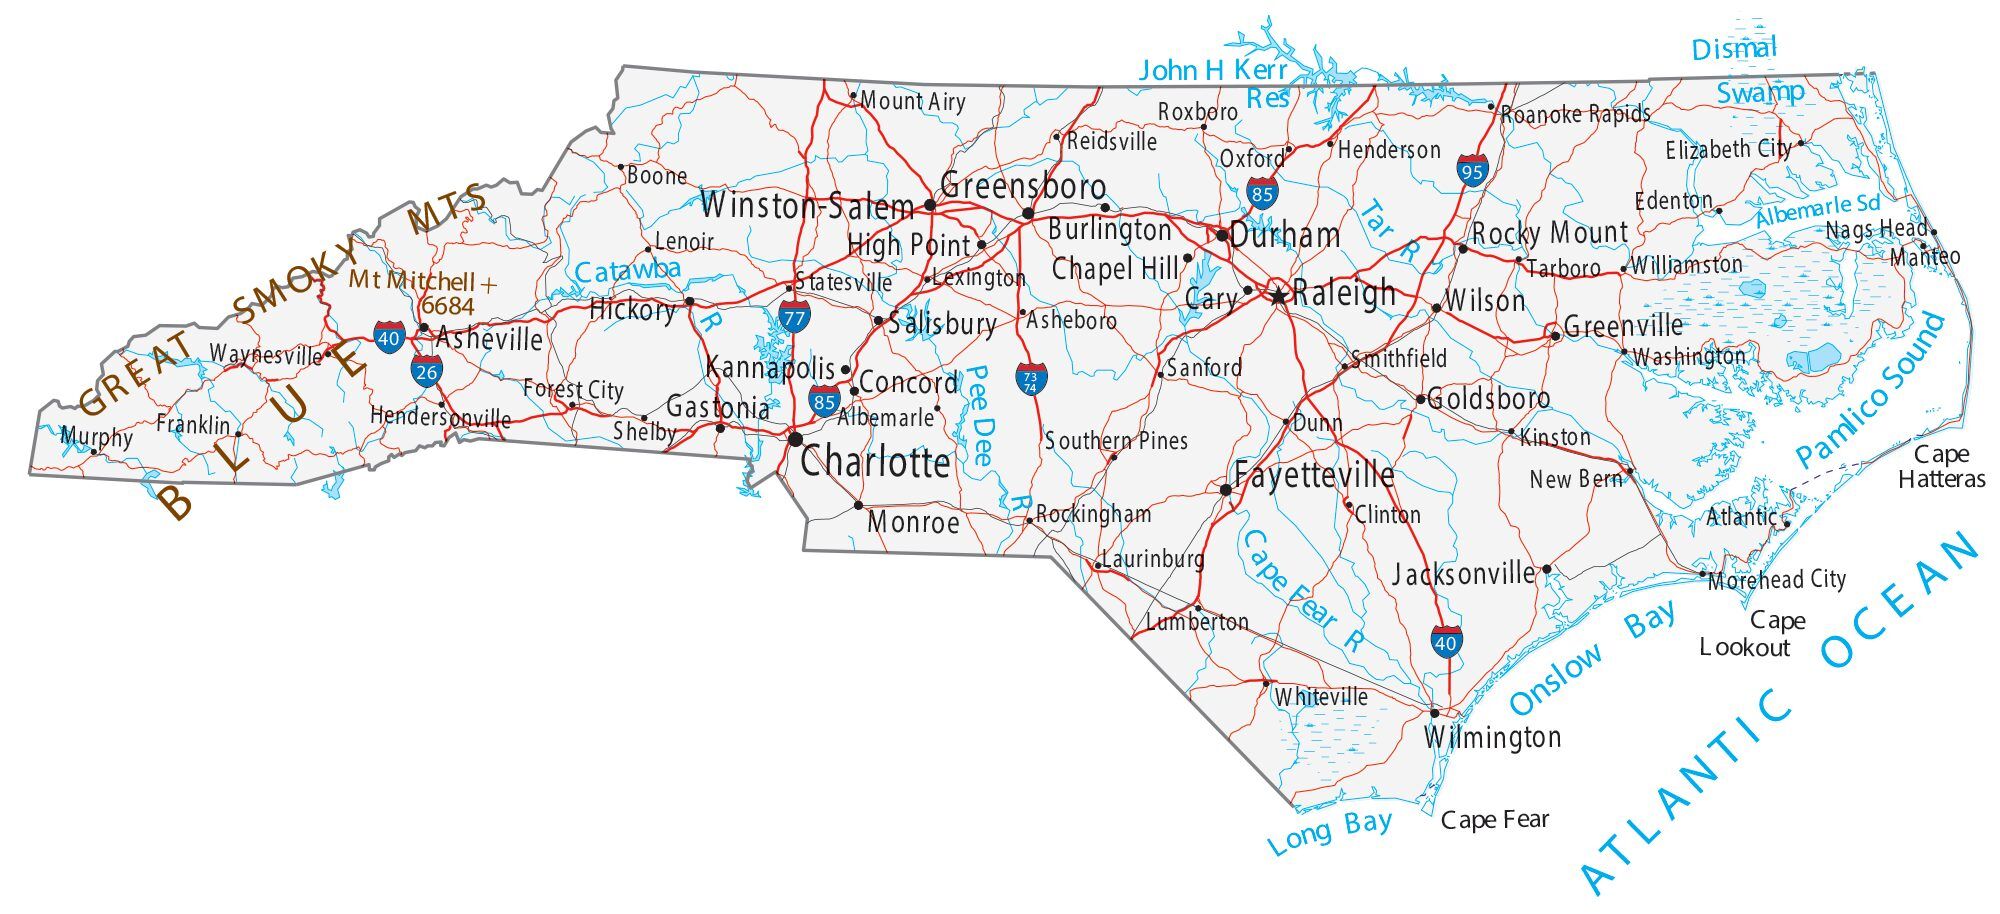 North Carolina Map - Cities and Roads - GIS Geography